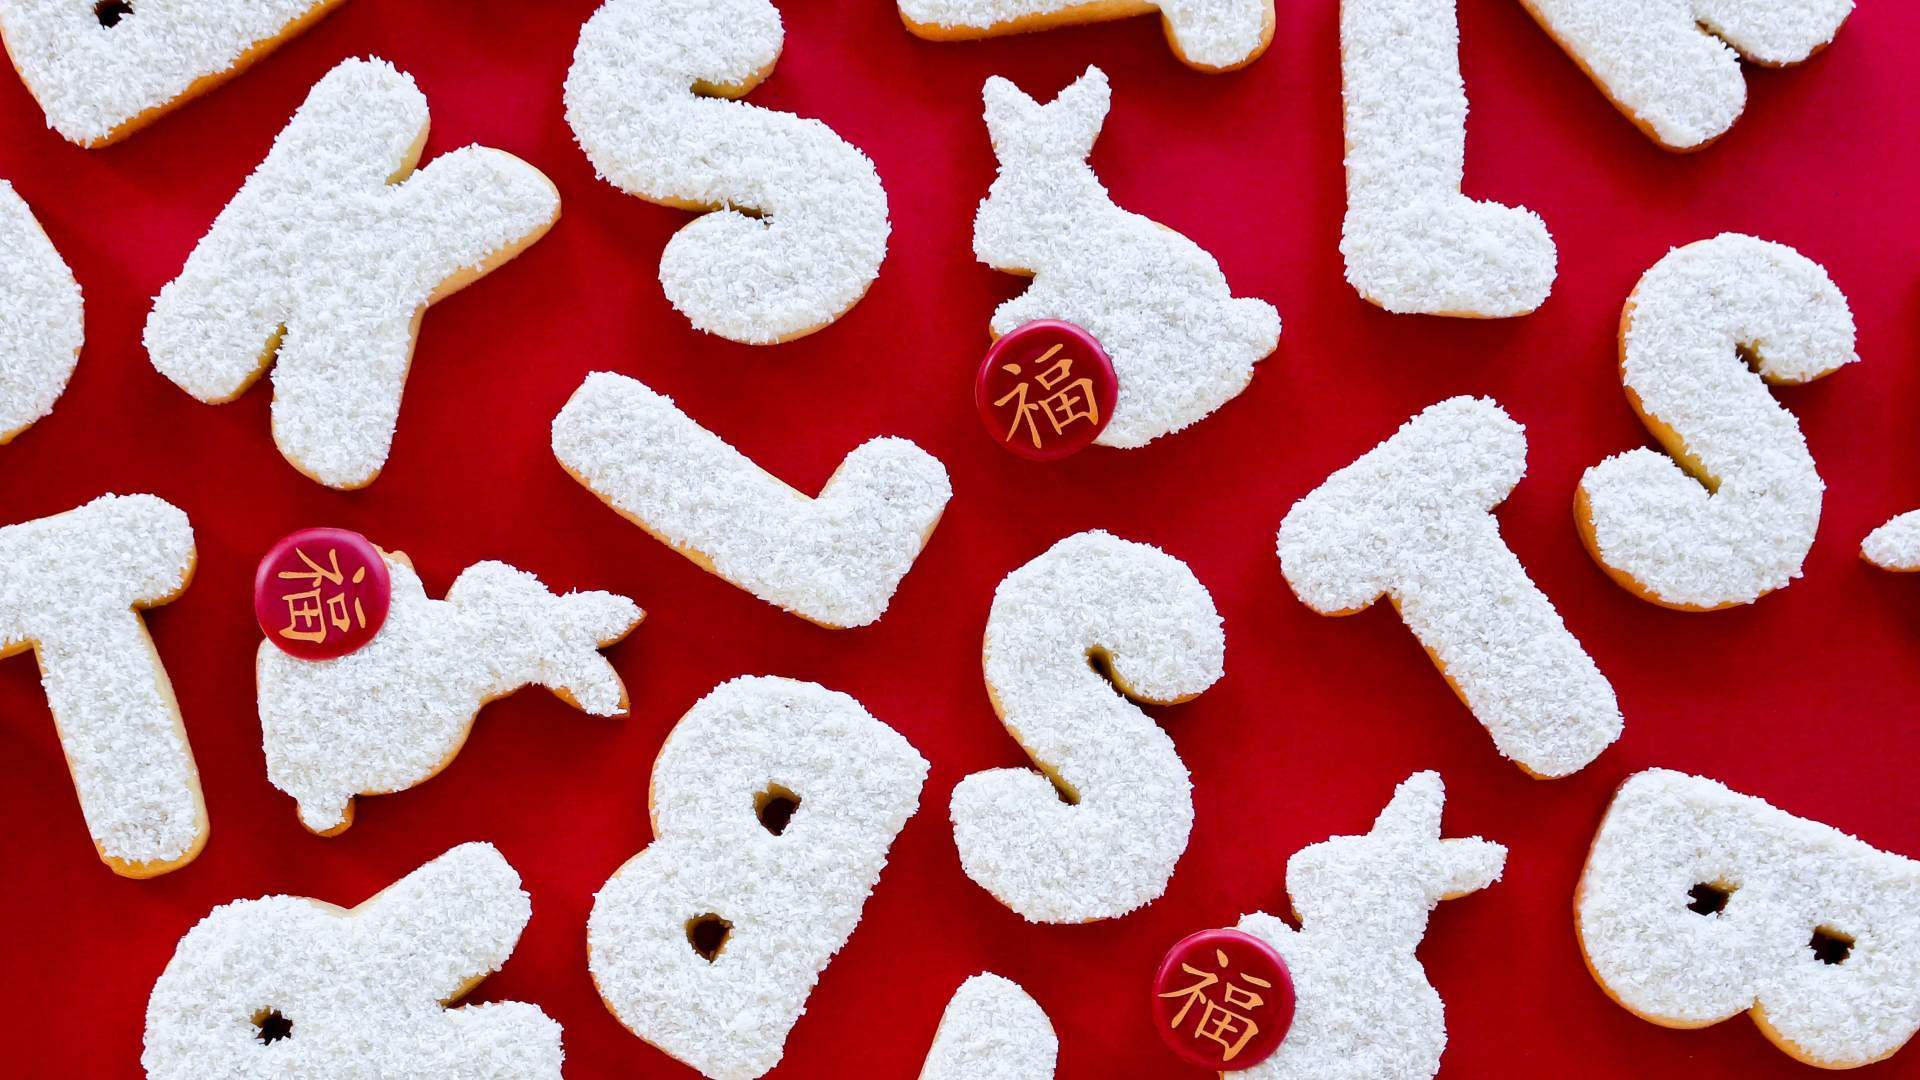 Black Star Is Spreading Good Fortune with Its Limited-Edition Lunar New Year Rabbit Cookies